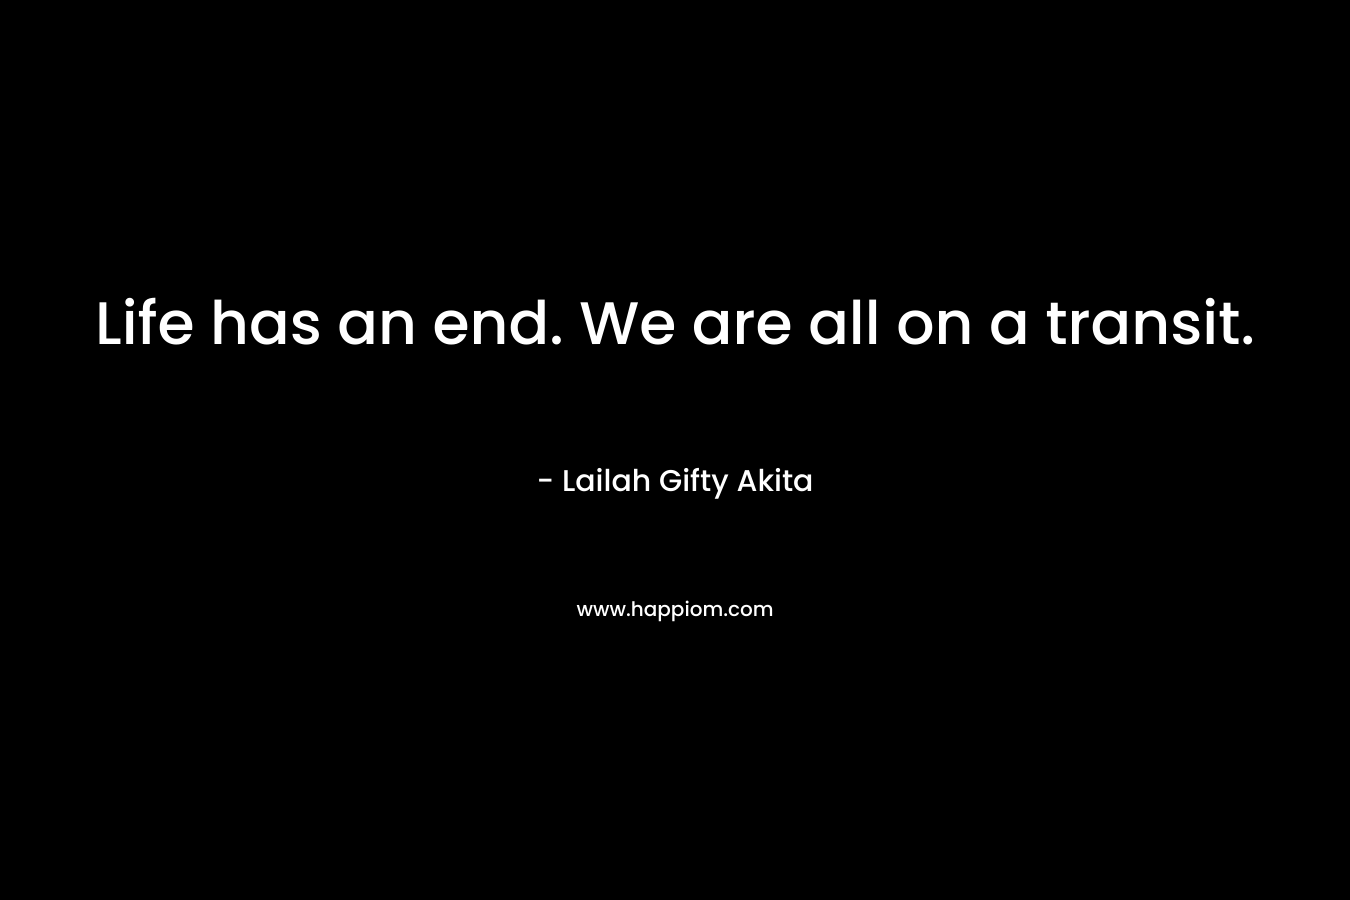 Life has an end. We are all on a transit.